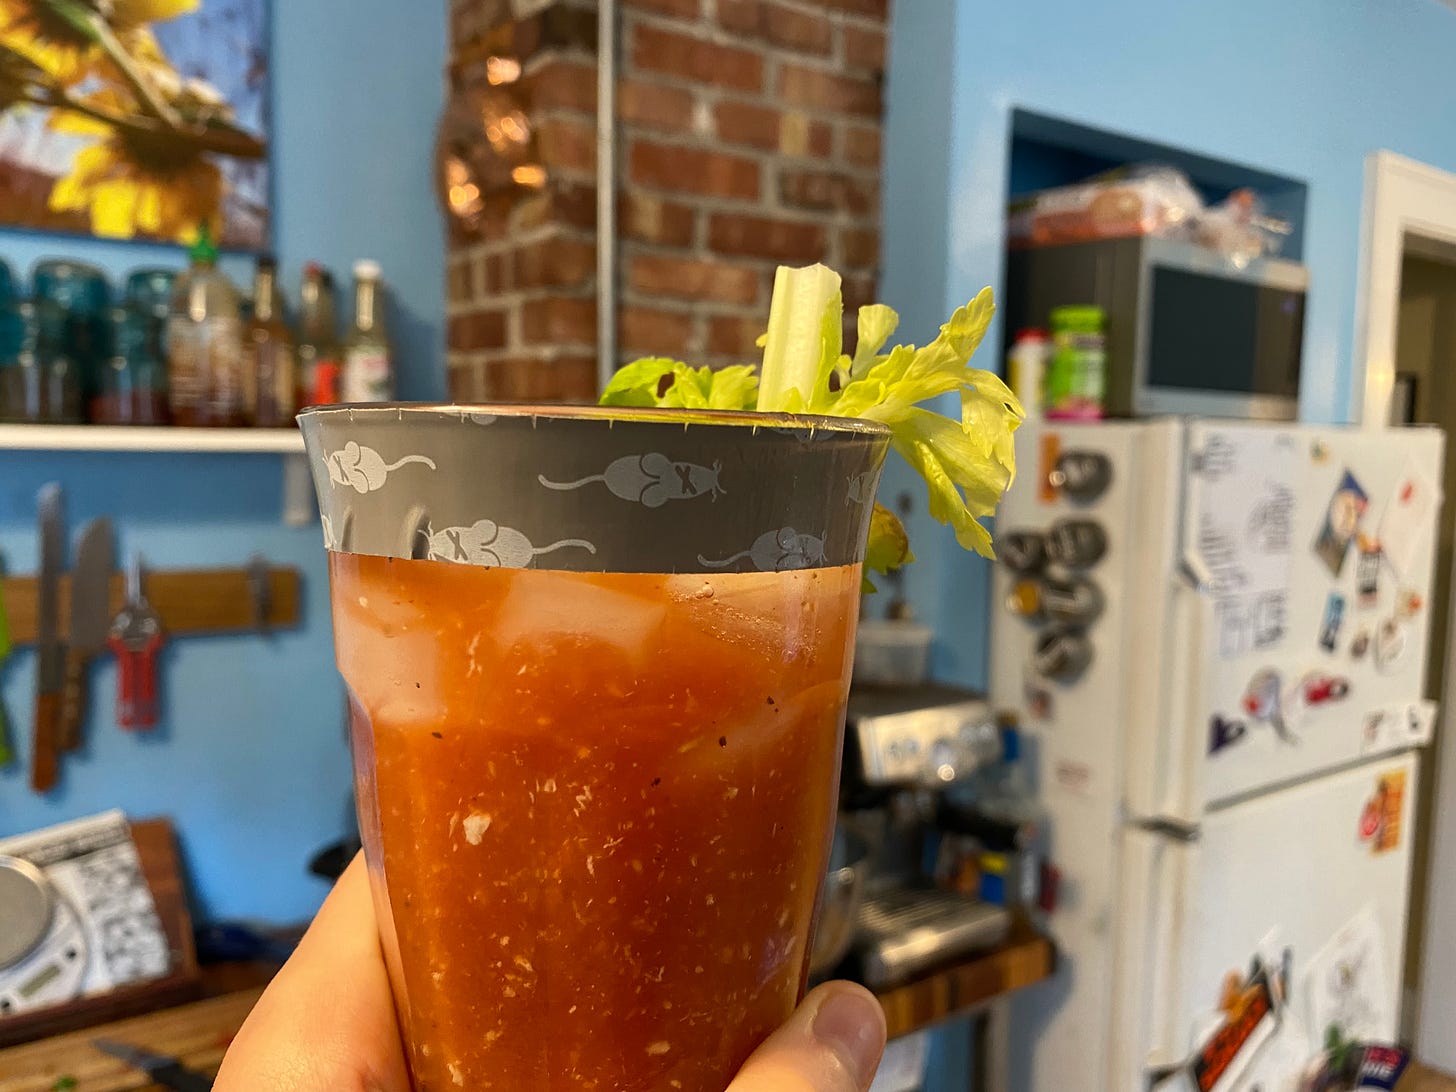 A Bloody Mary with a strip of gray vinyl mouse tape around the lip of the glass.